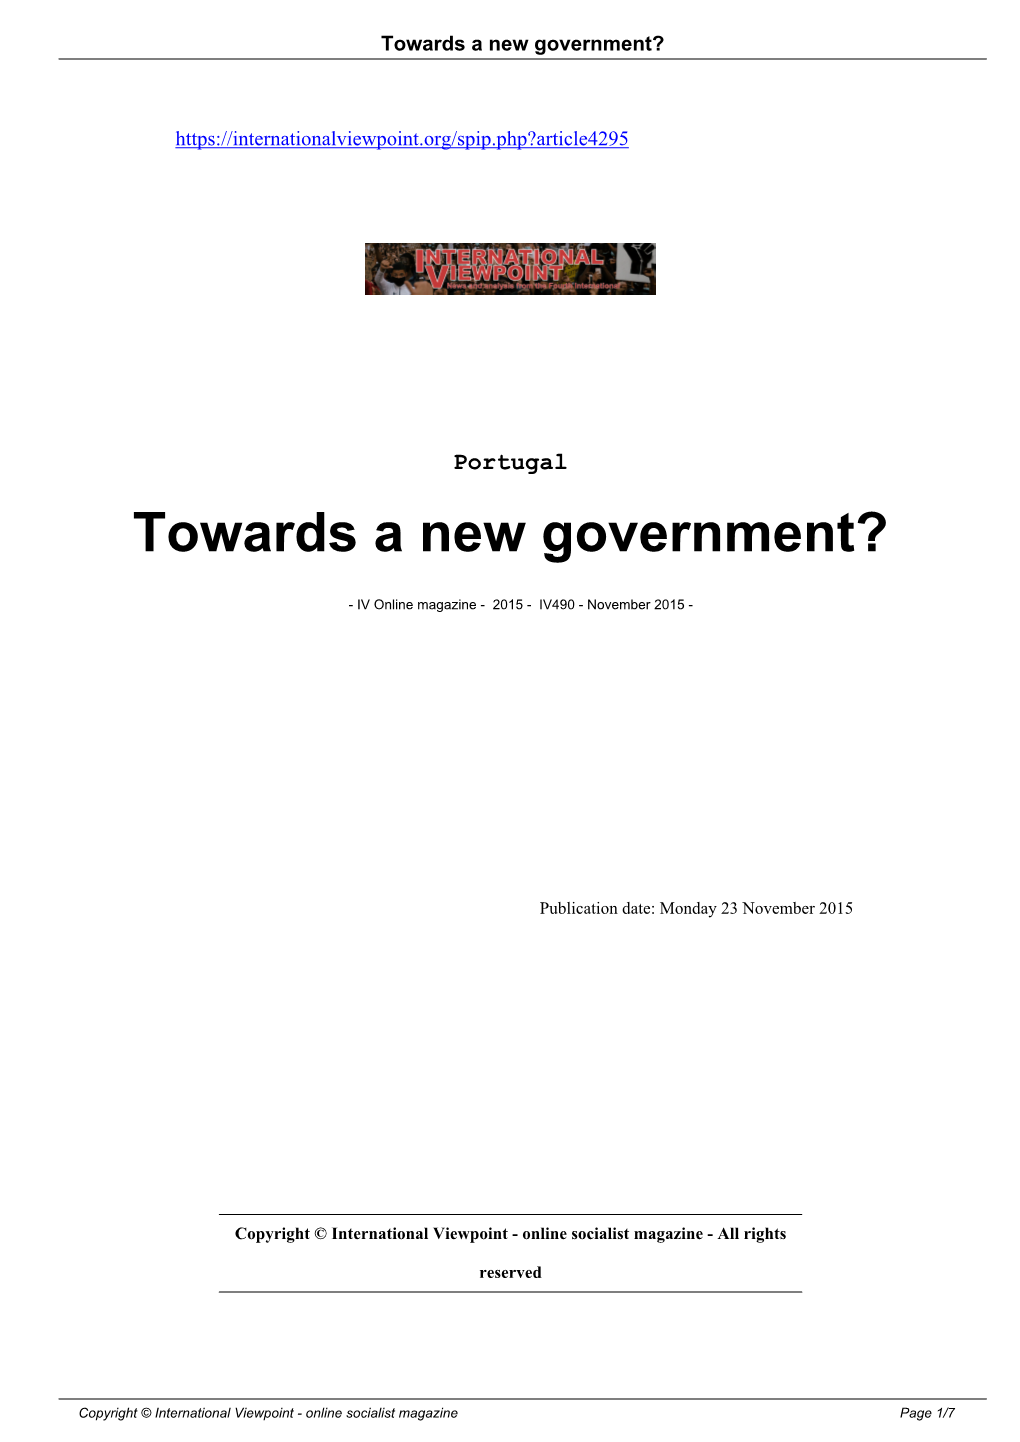 Towards a New Government?